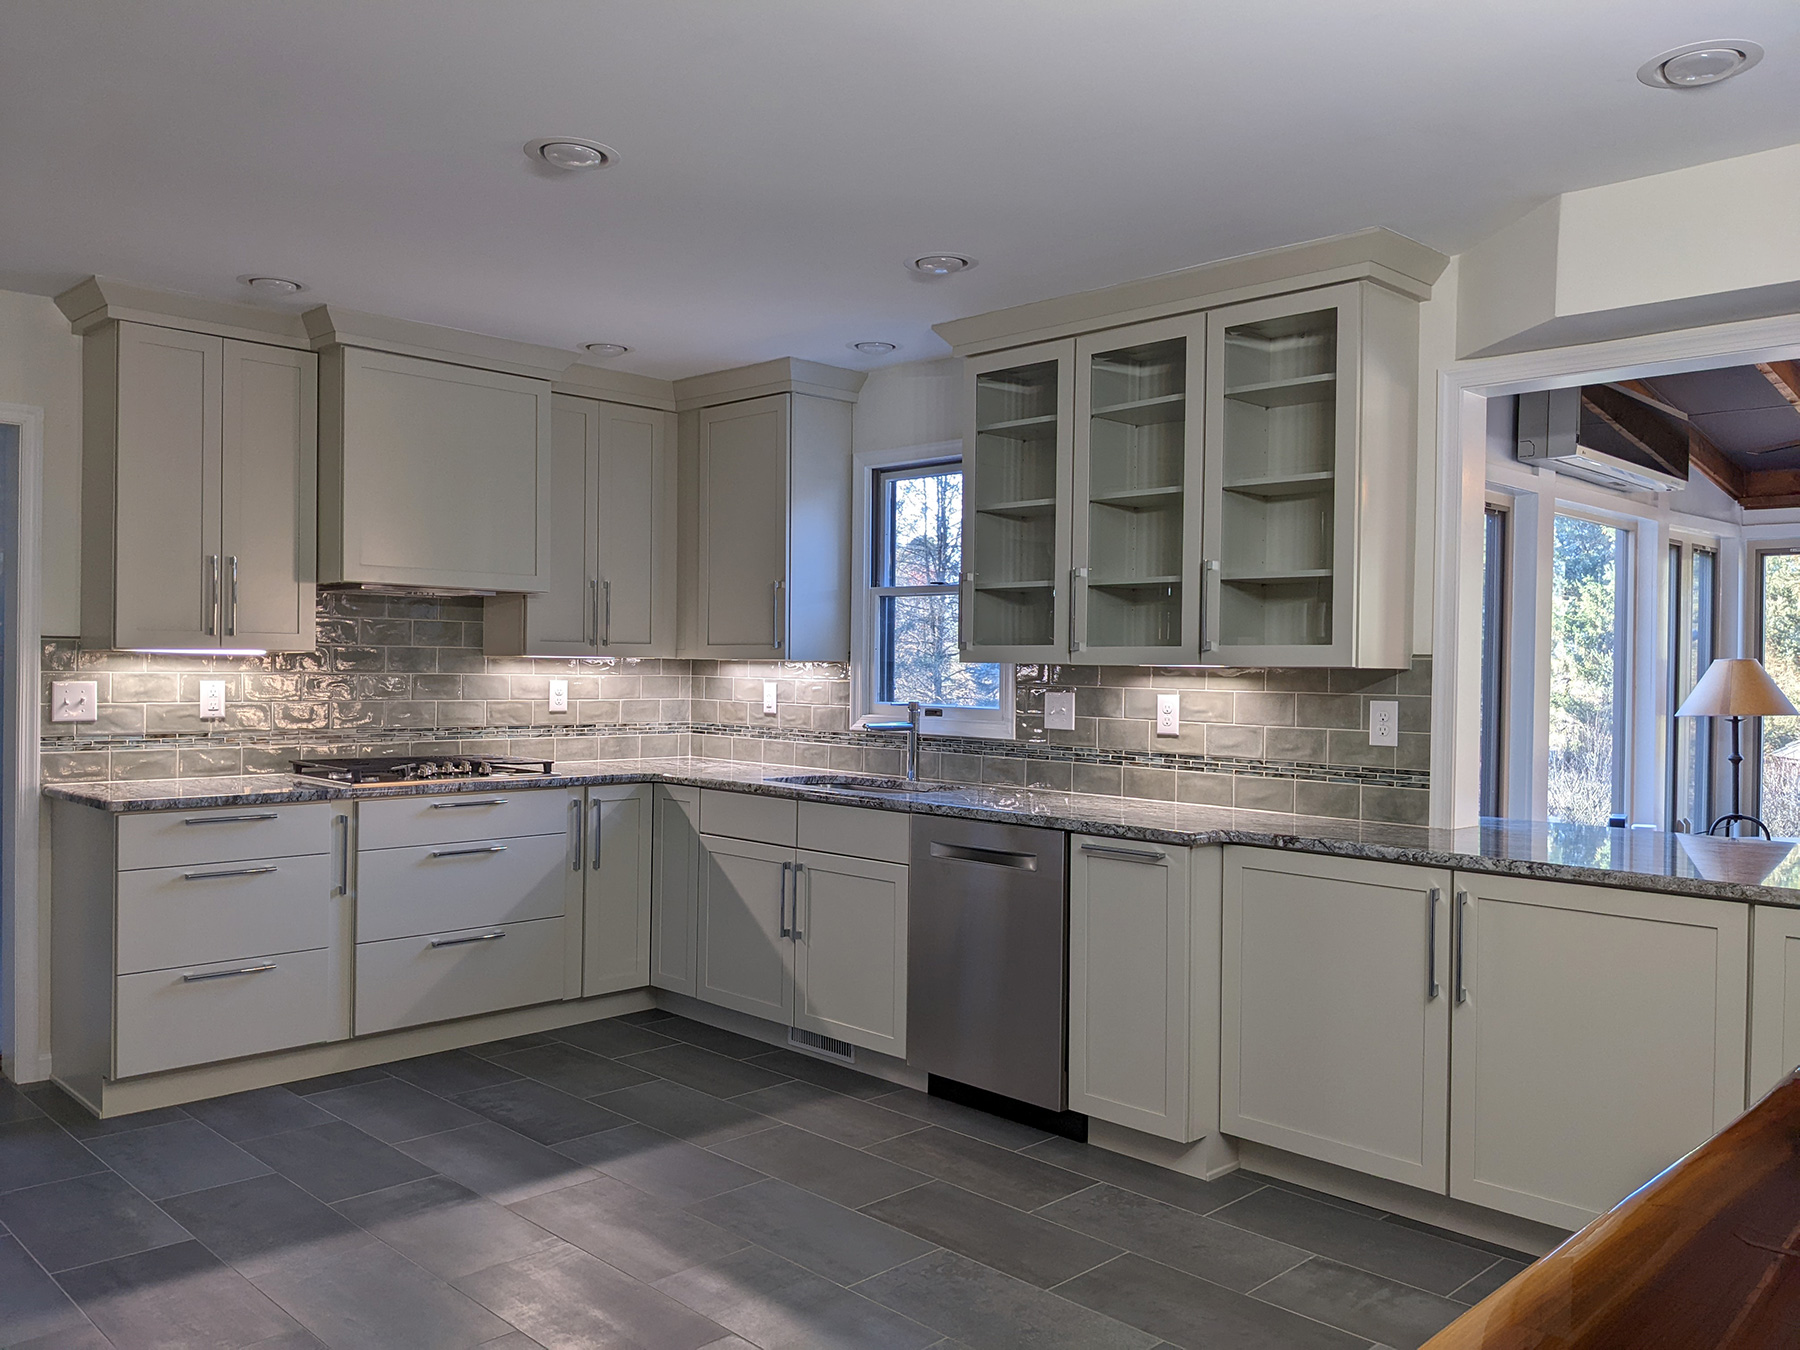 Revitalizing a Kitchen with Modern Flair in Fleetwood, PA